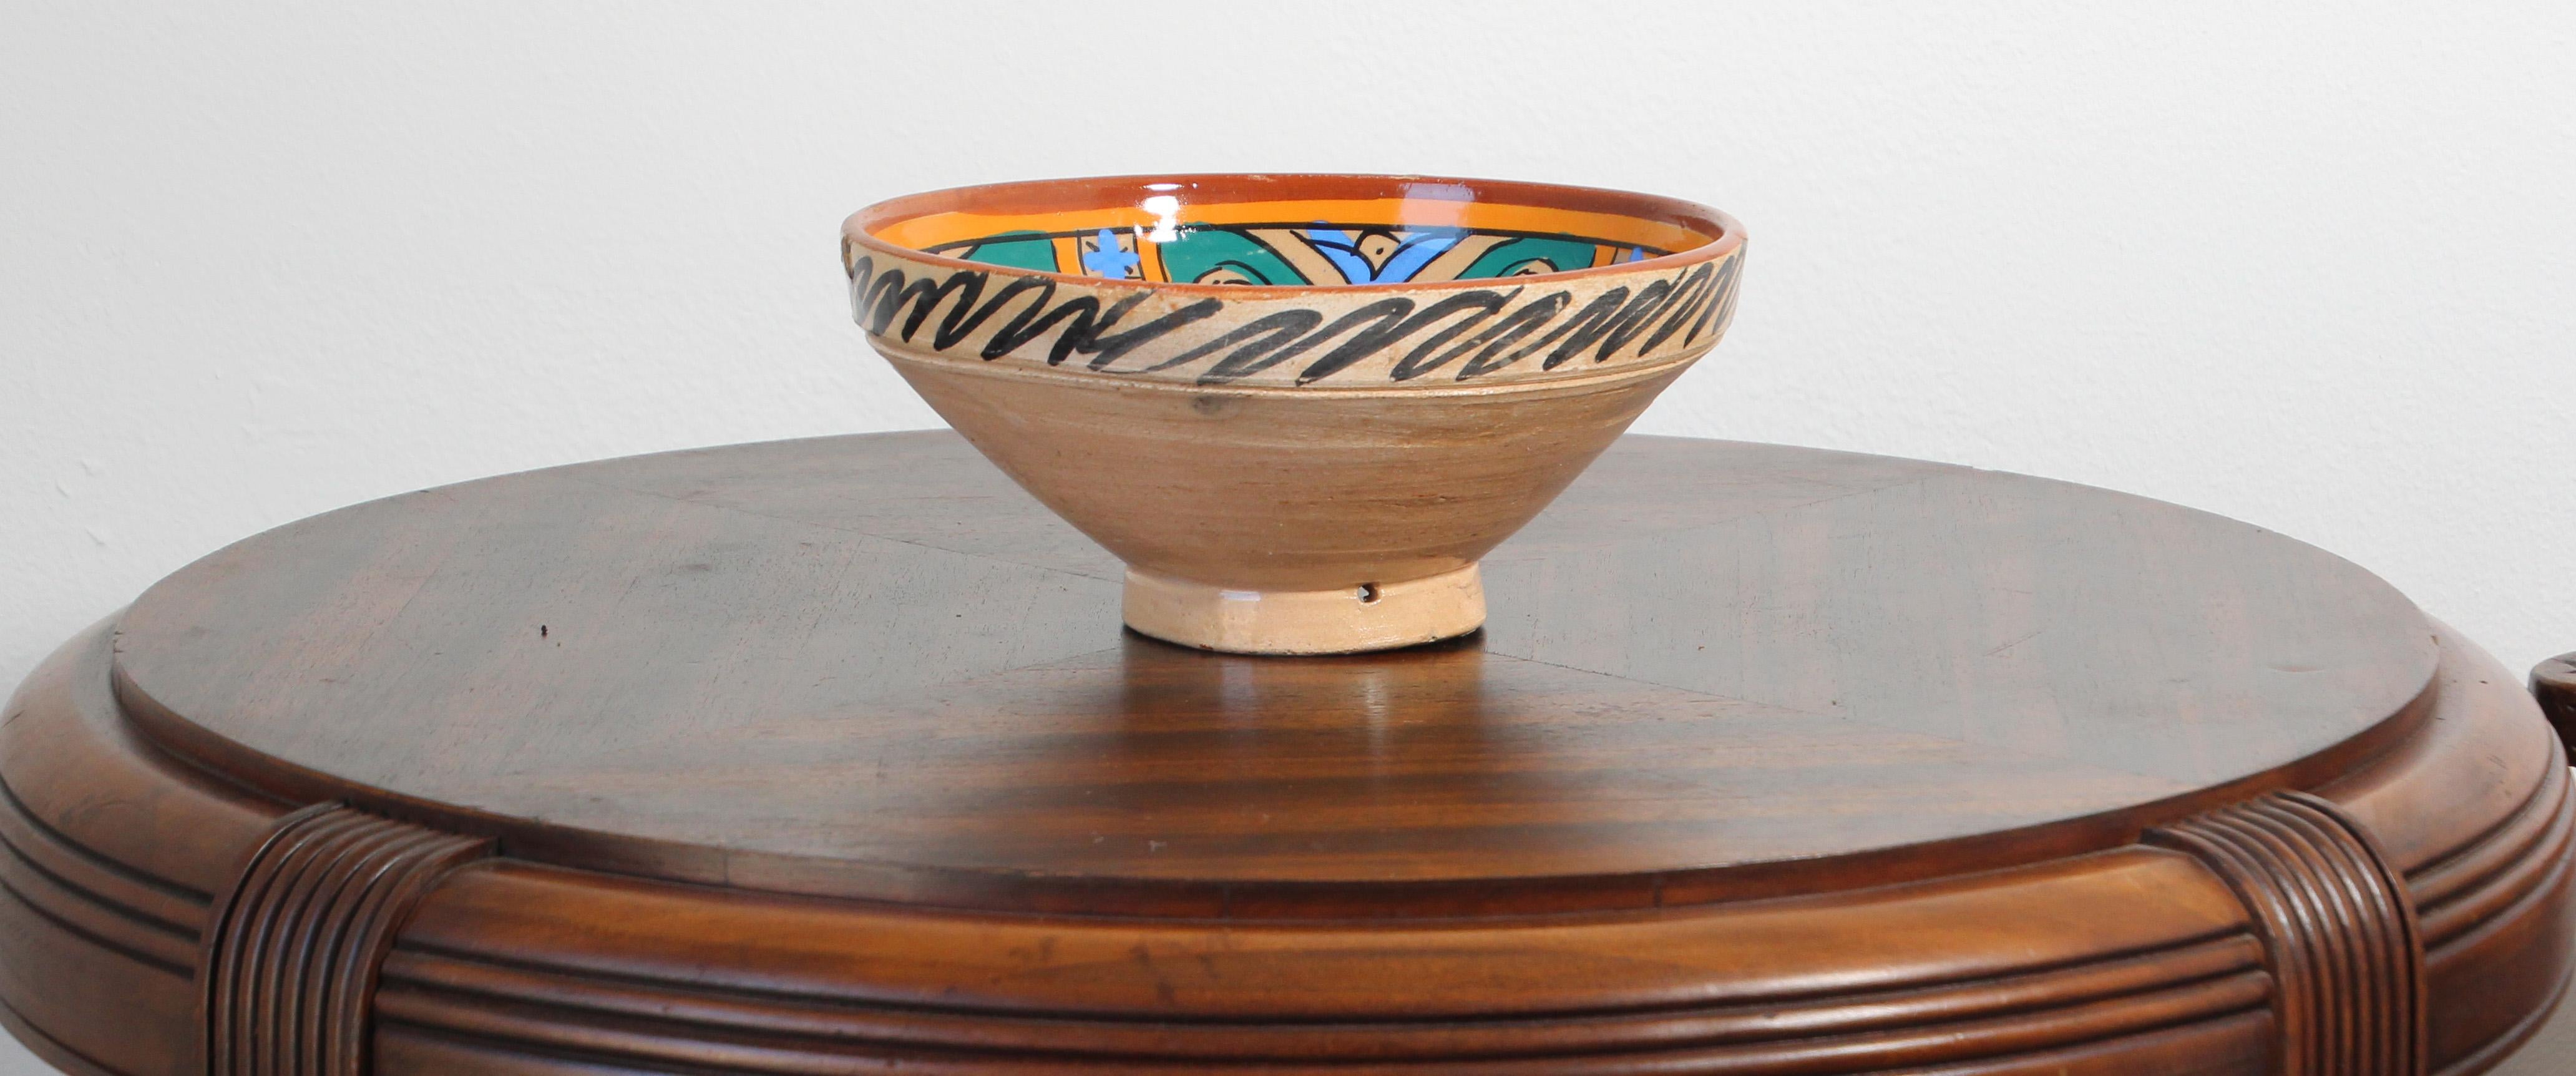 Handcrafted Antique Moroccan Couscous Bowl from Fez, 19th Century In Good Condition For Sale In North Hollywood, CA